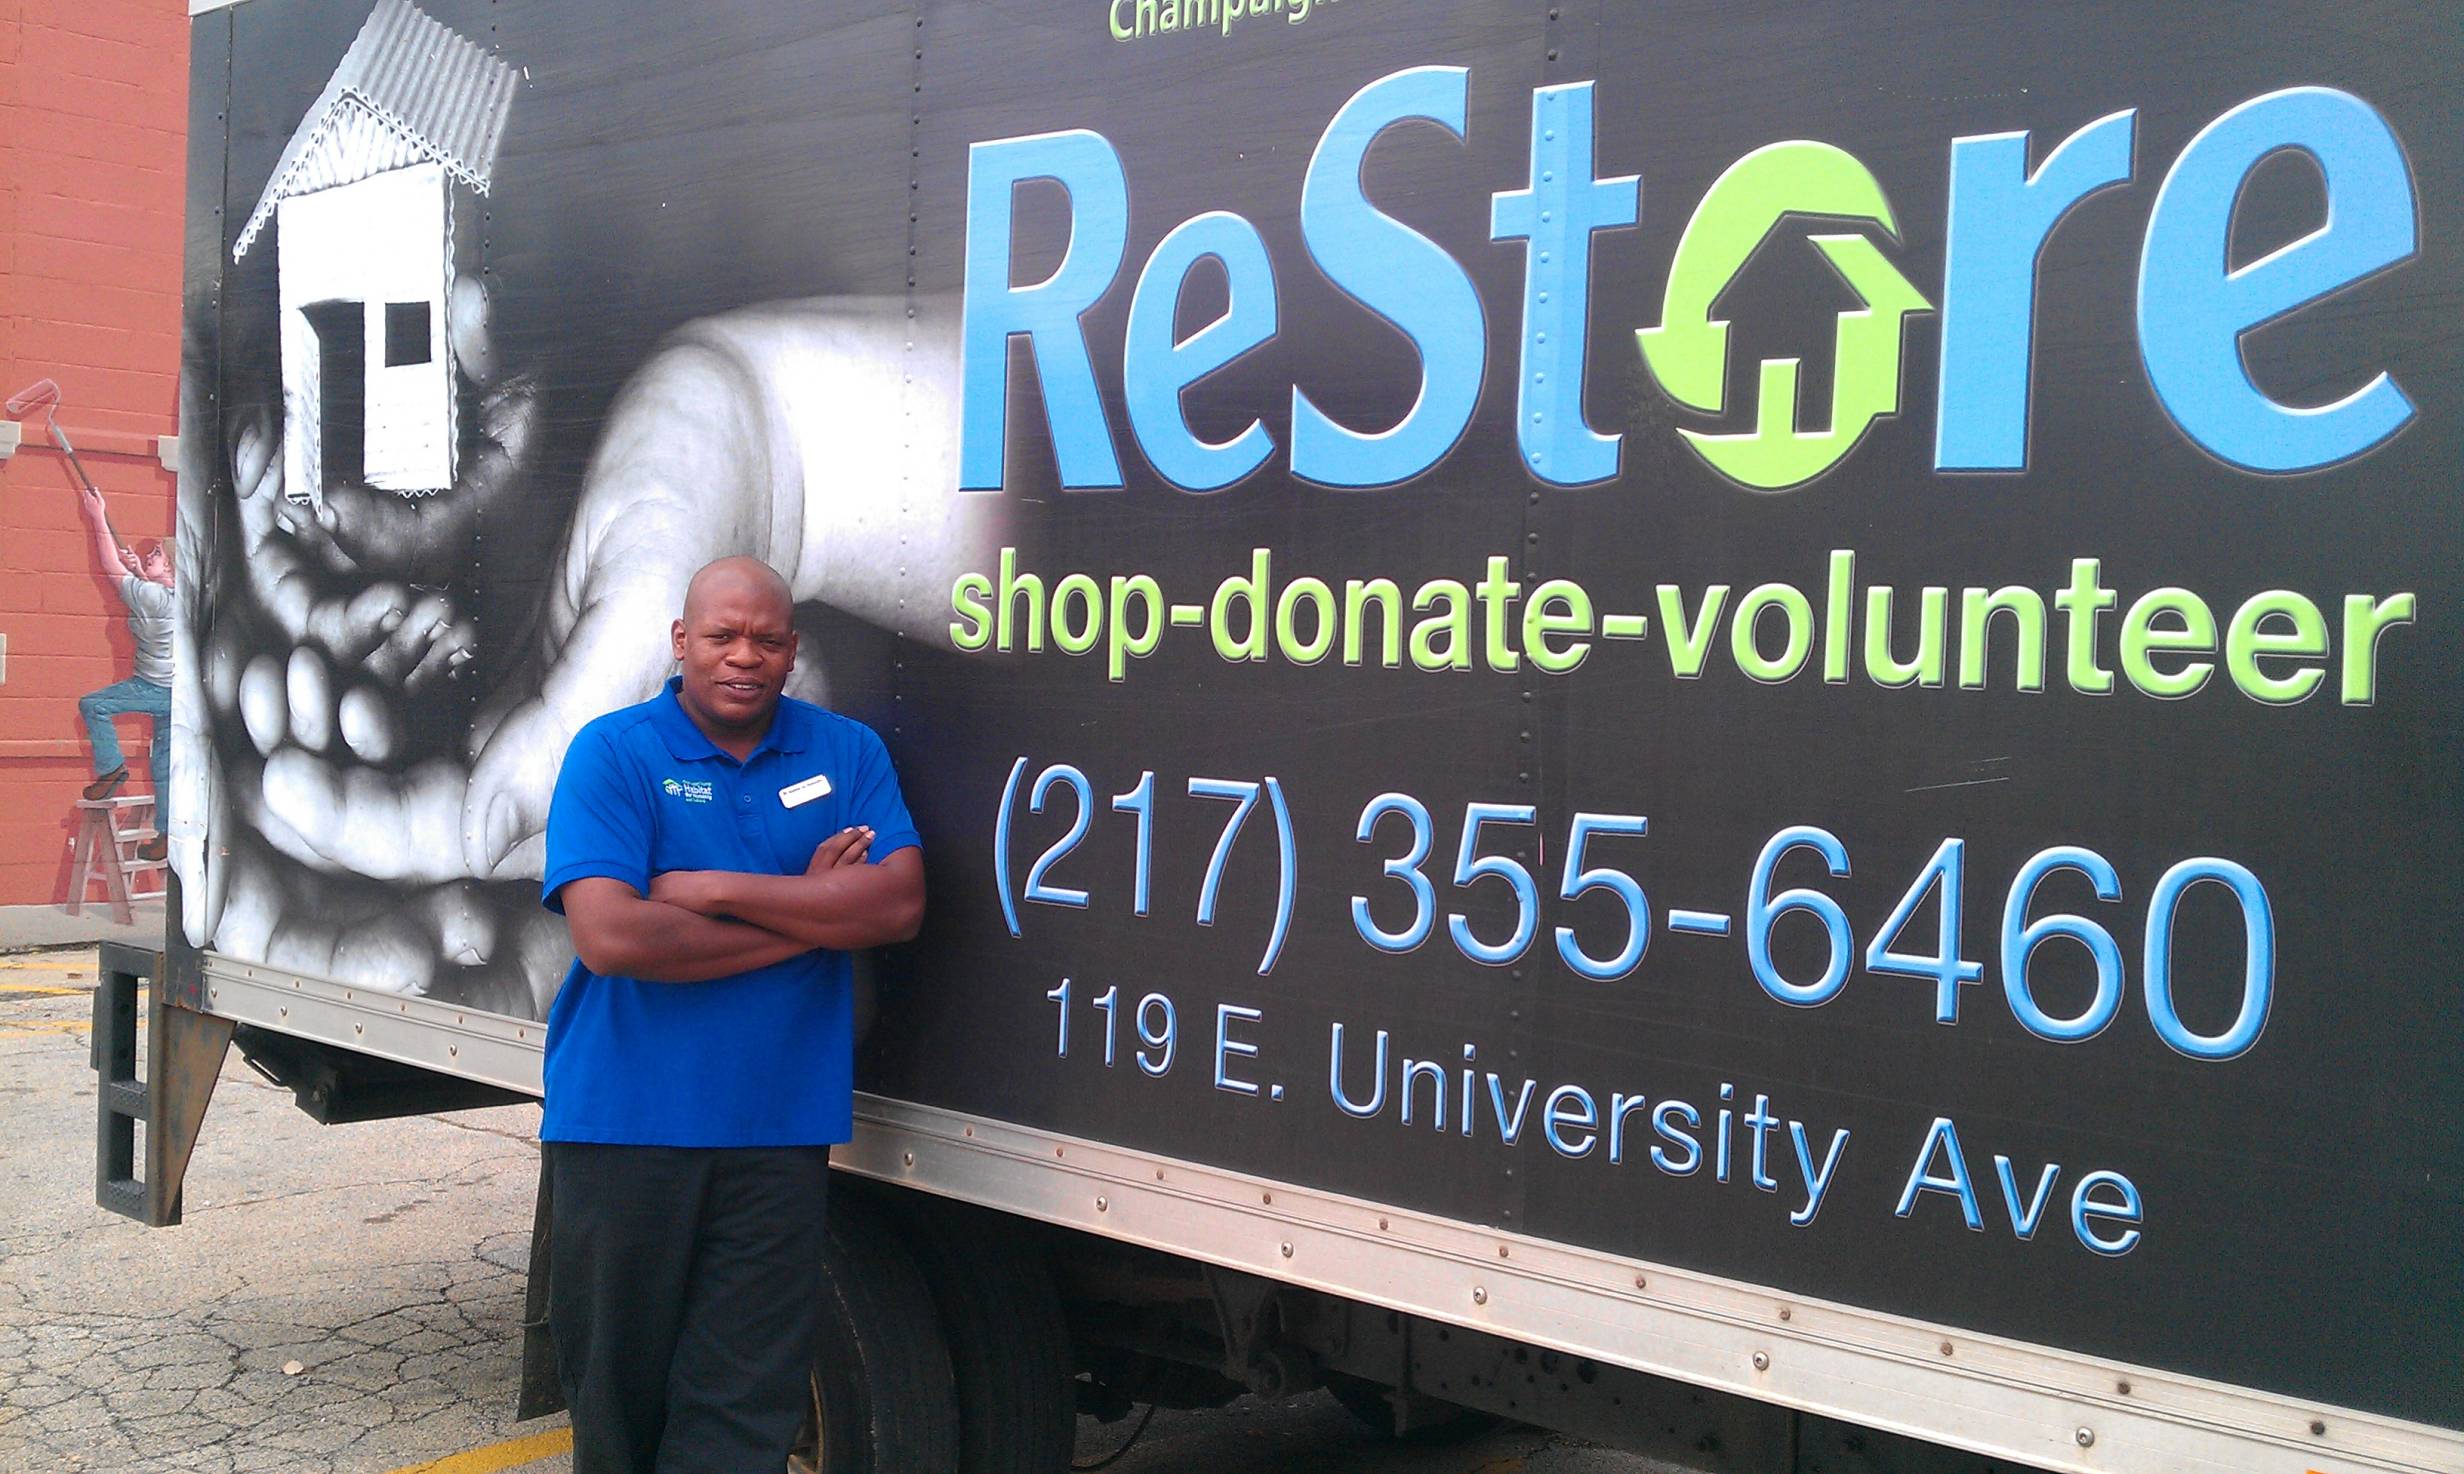 Catching up with Habitat for Humanity’s ReStore